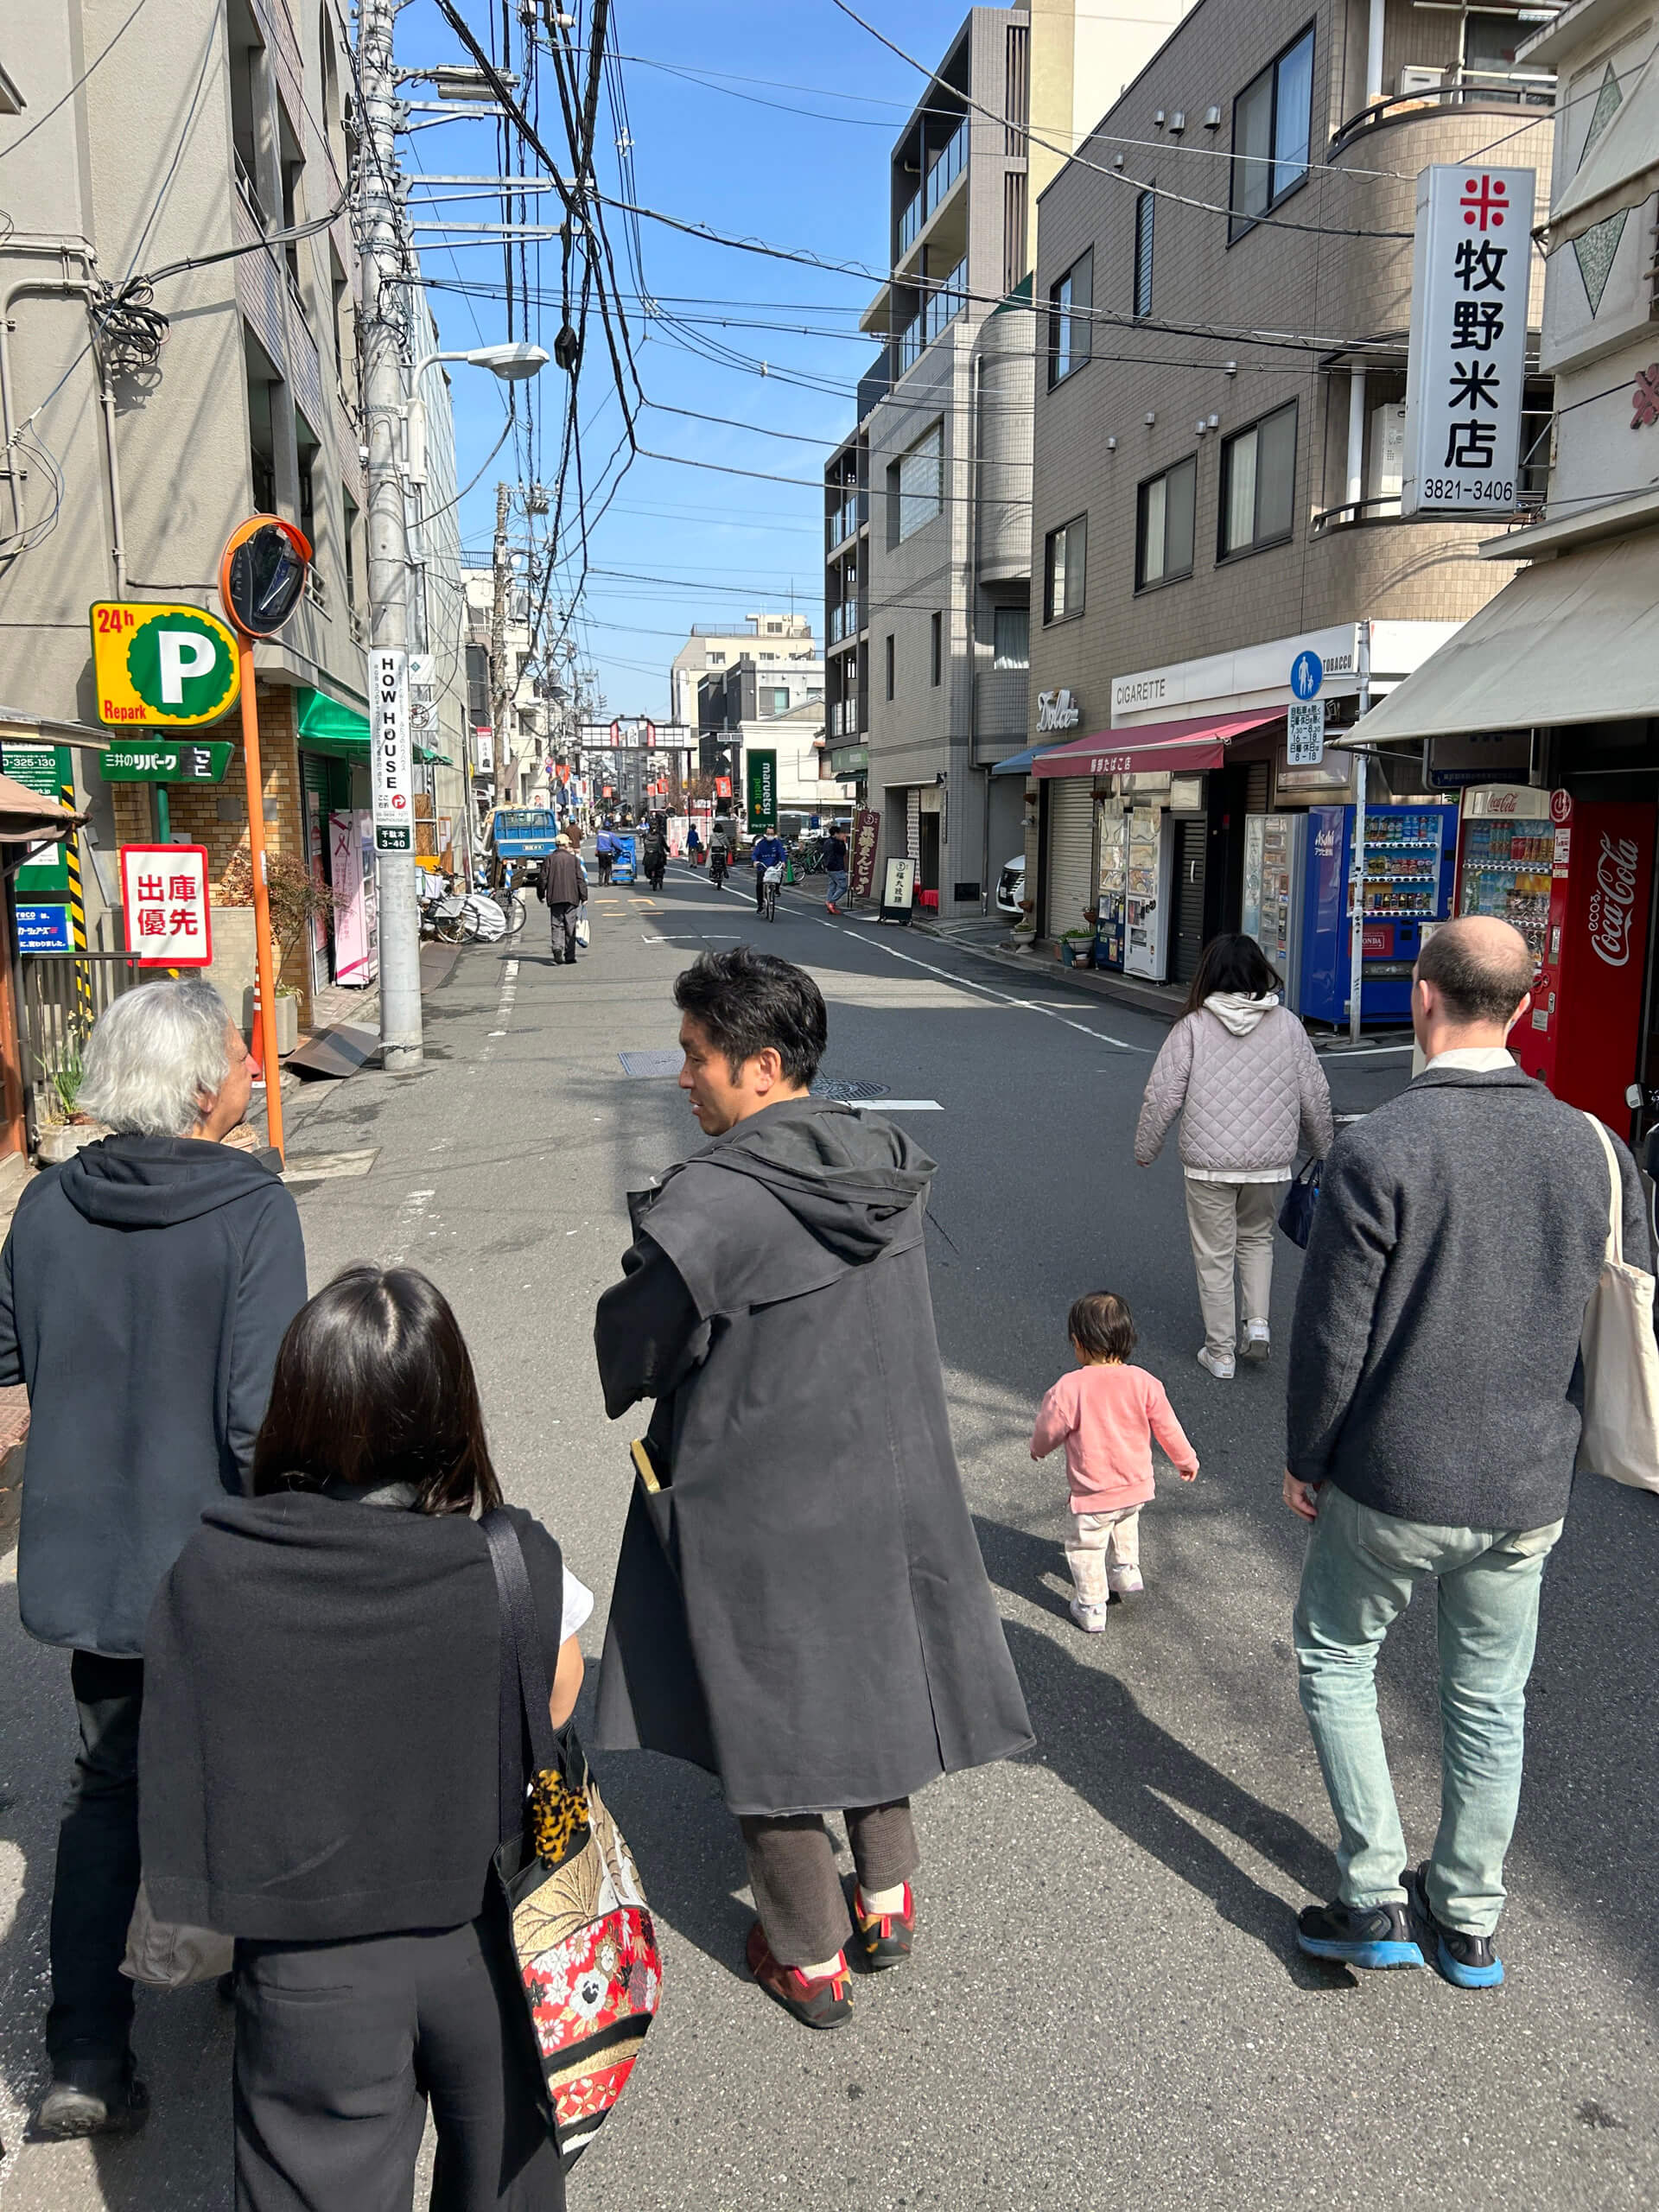 Miyazaki leads a walking tour of his projects